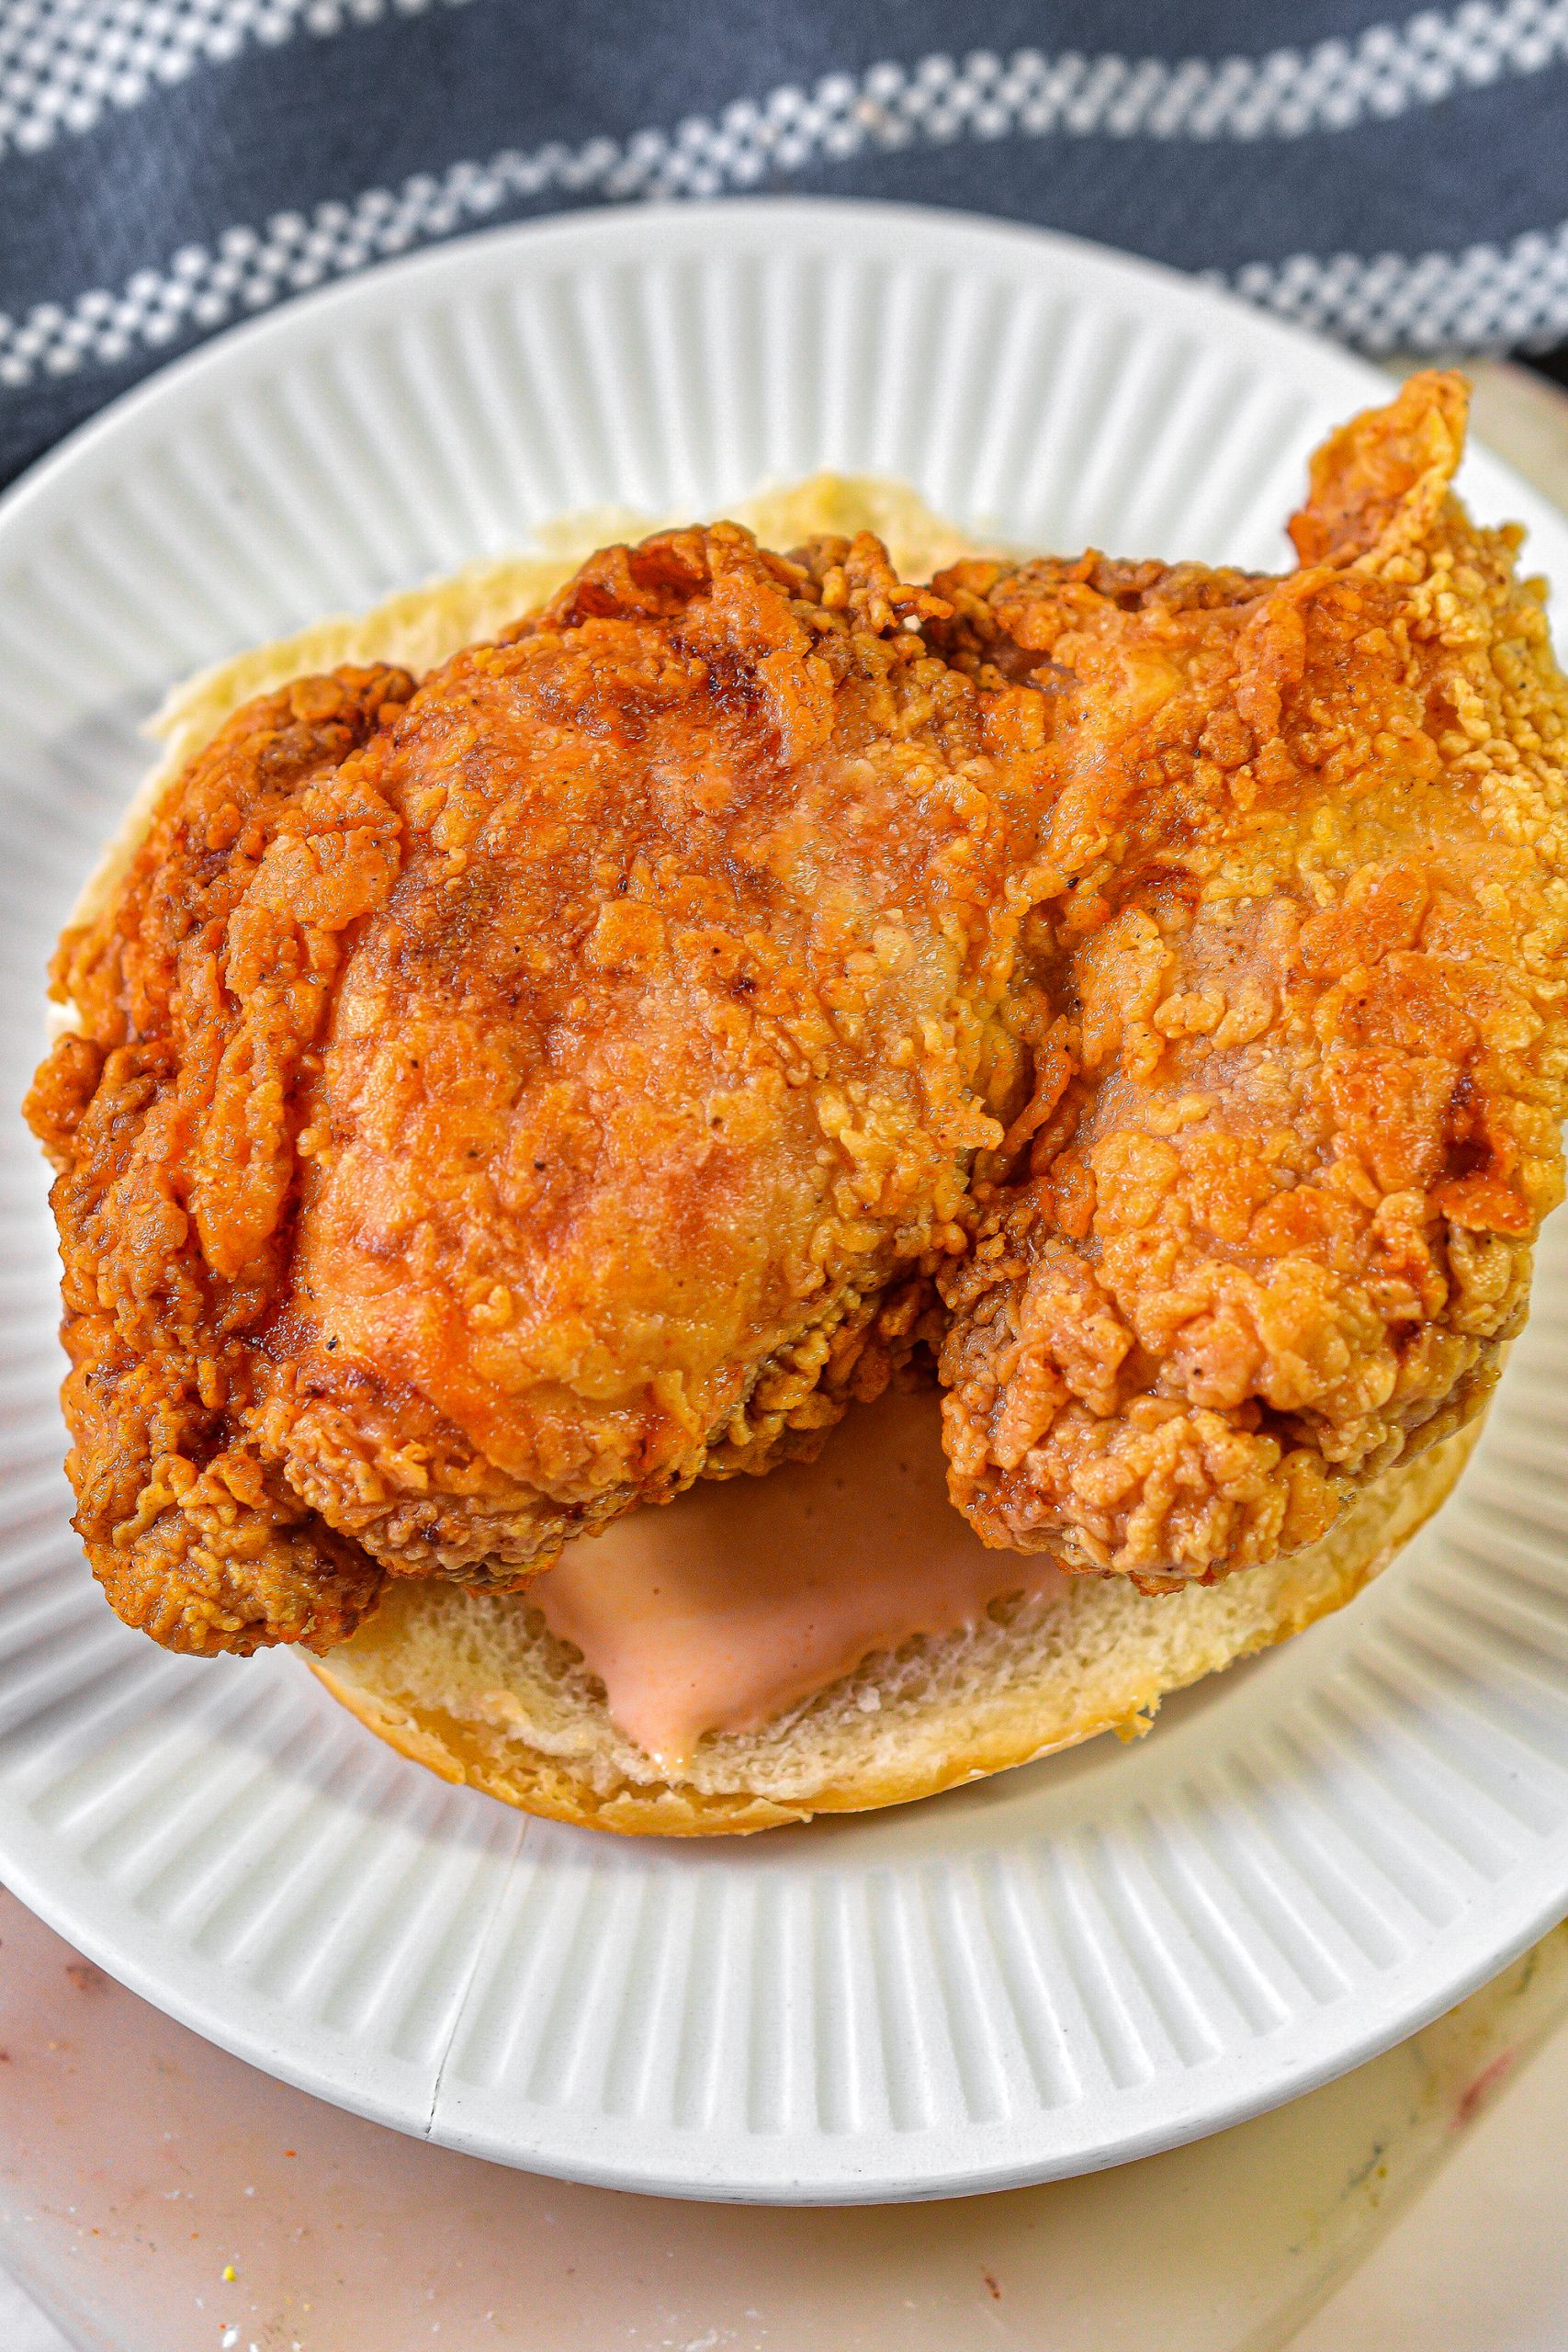 Place a piece of the fresh fried chicken on top.